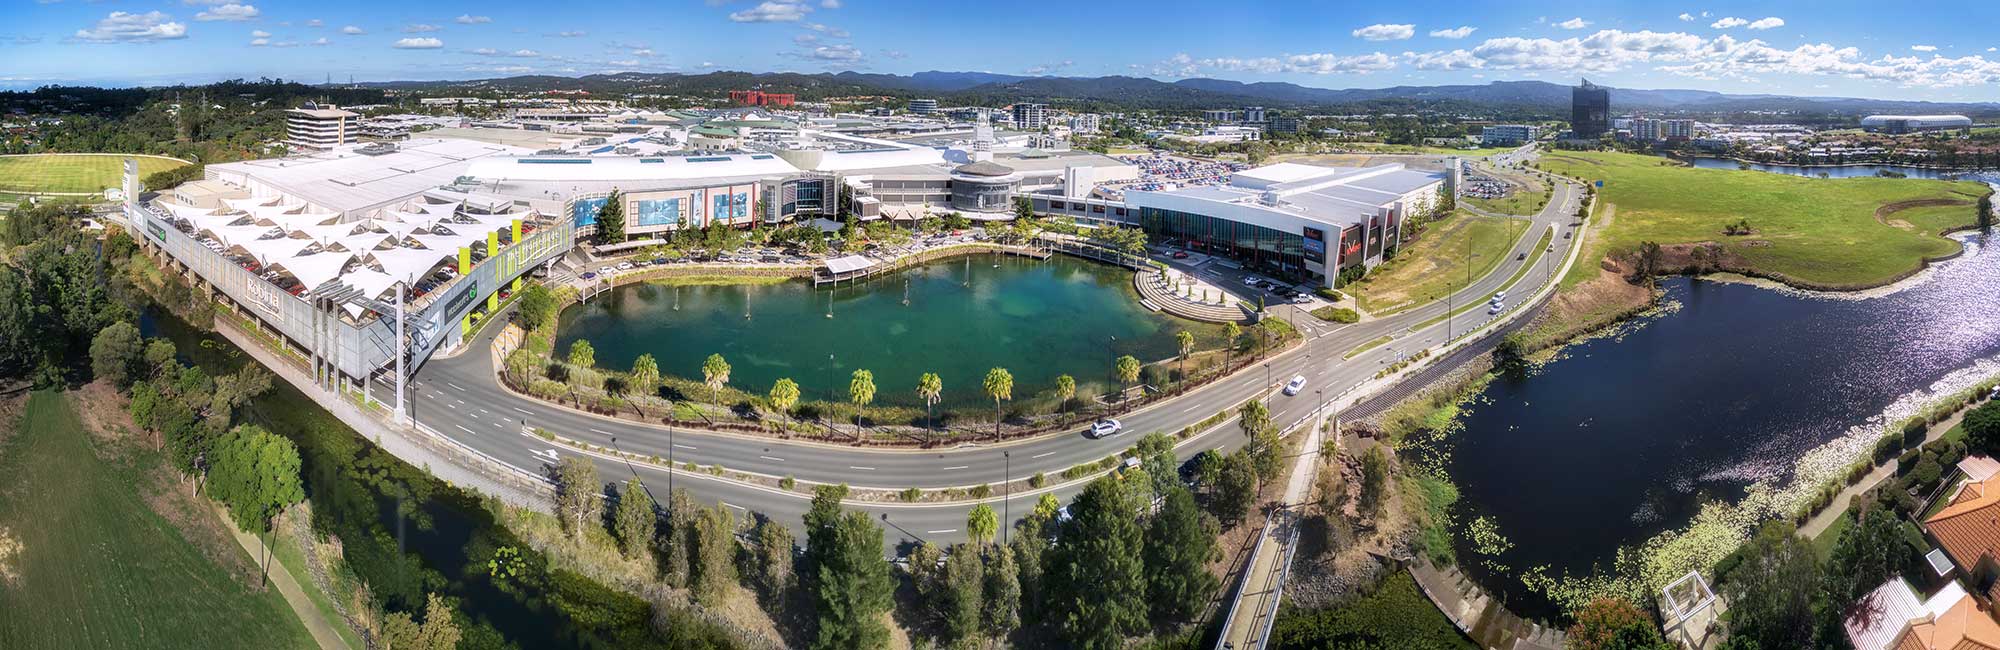 aerial drone photography of Robina Shopping Centre DroneAce Drone photography April 2017 